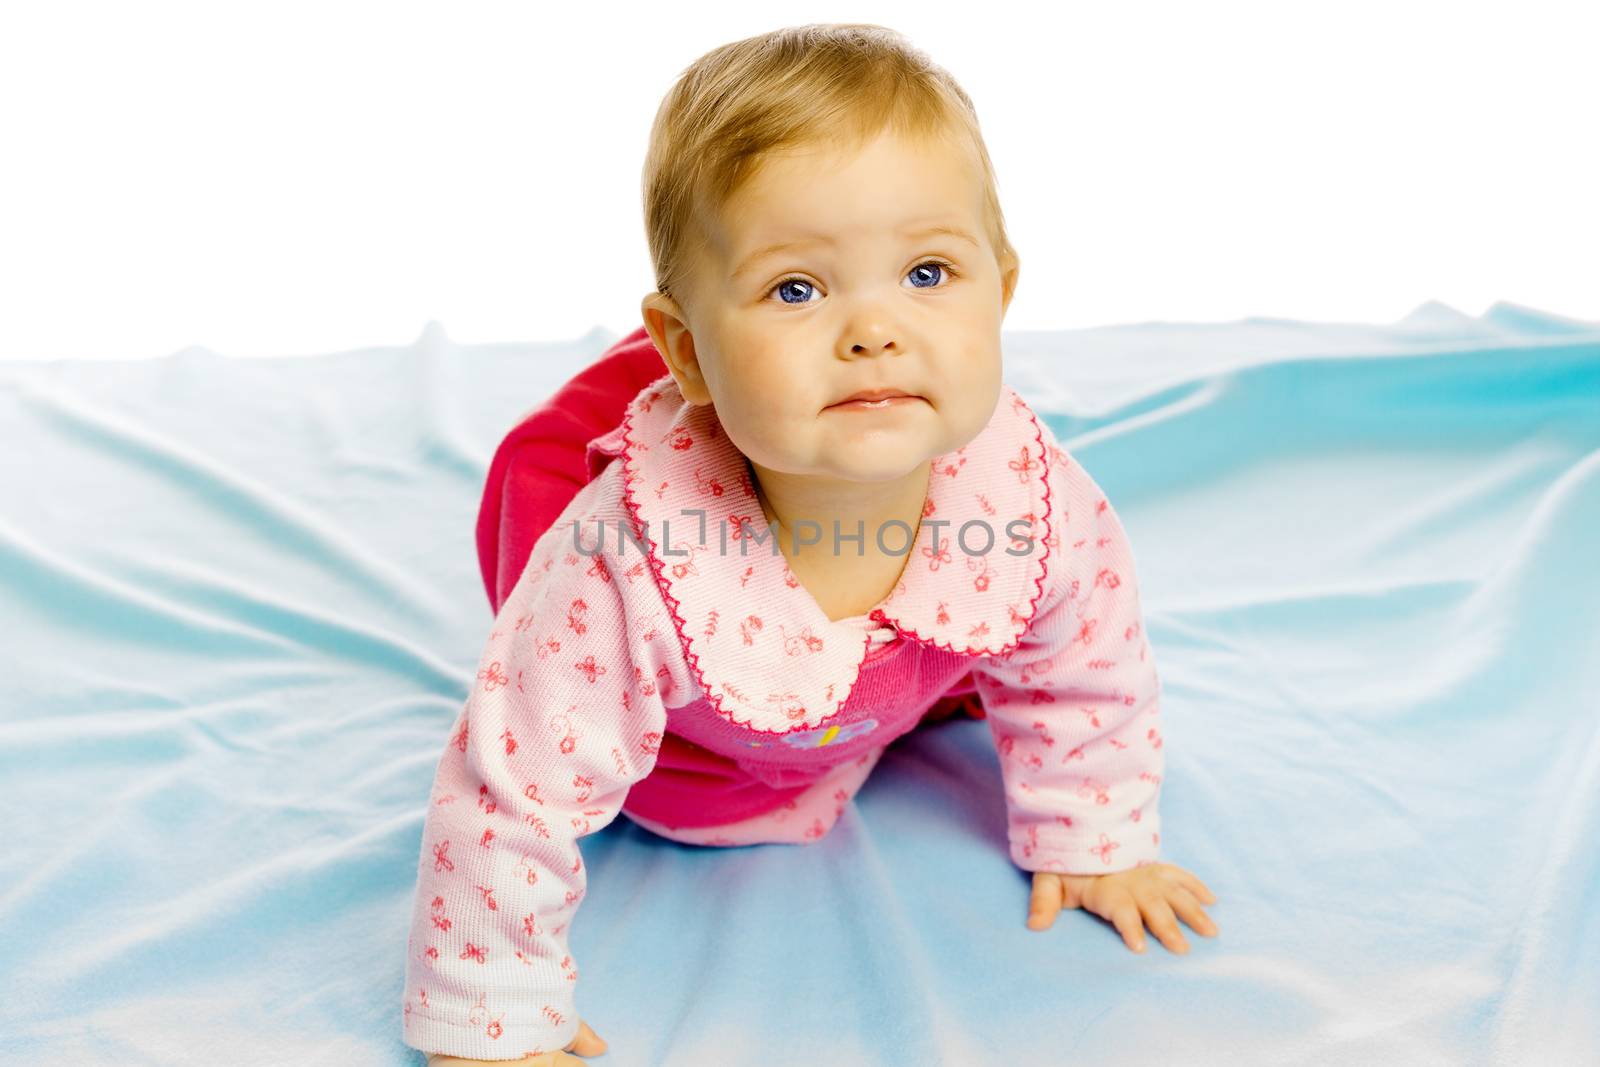 baby girl in a dress crawling on the floor and looking at the camera